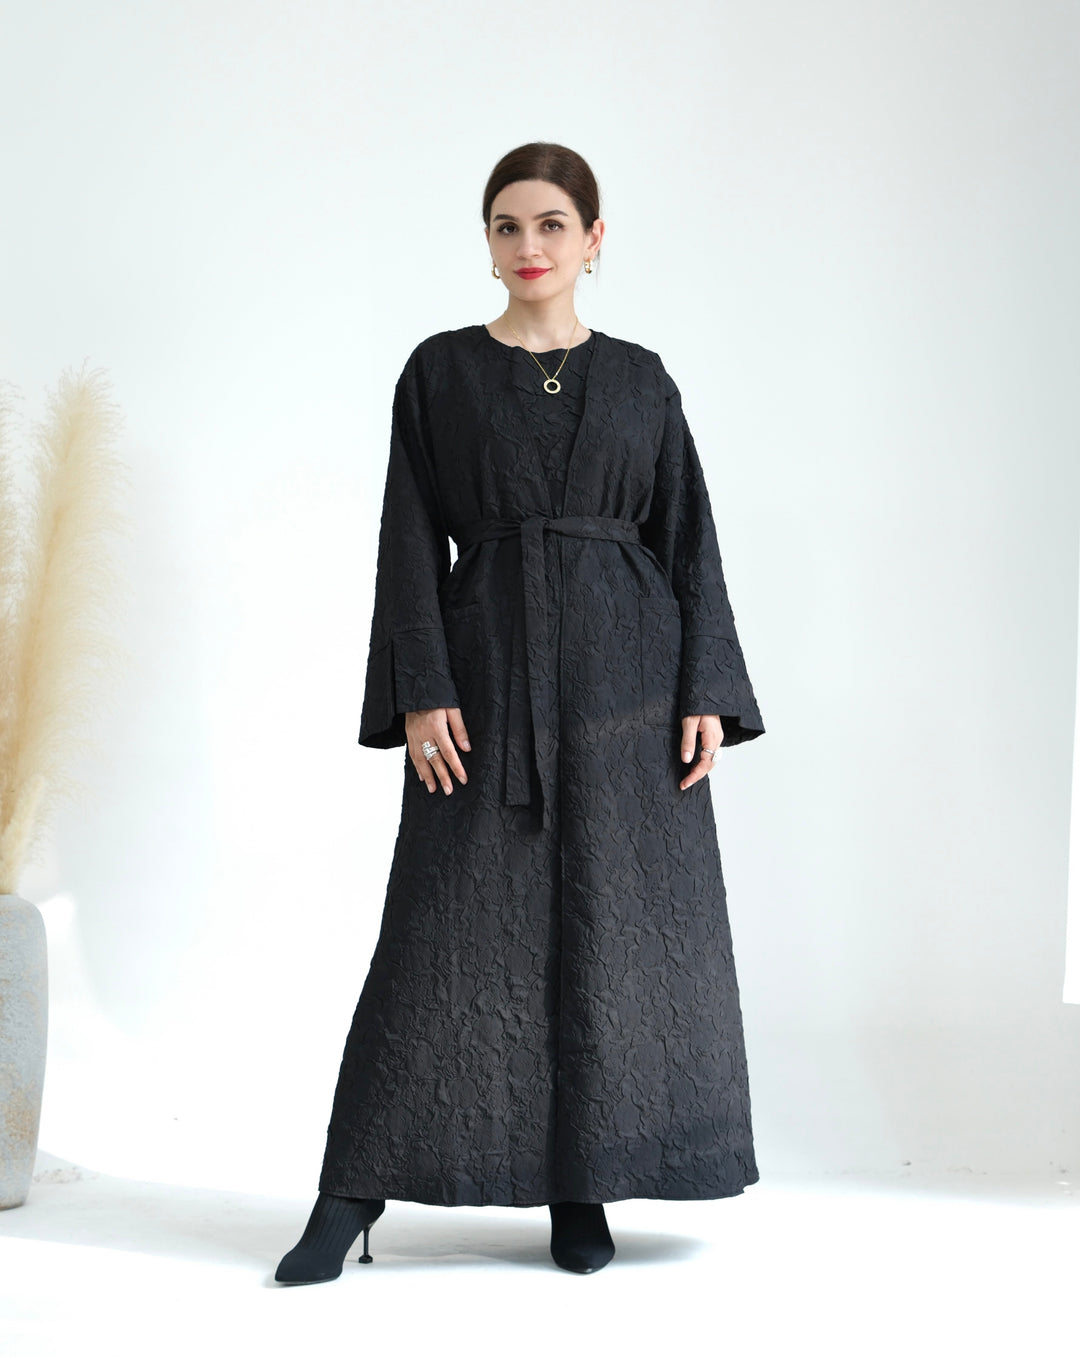 Get trendy with Eva Textured Abaya Set - Black - Dresses available at Voilee NY. Grab yours for $94.90 today!